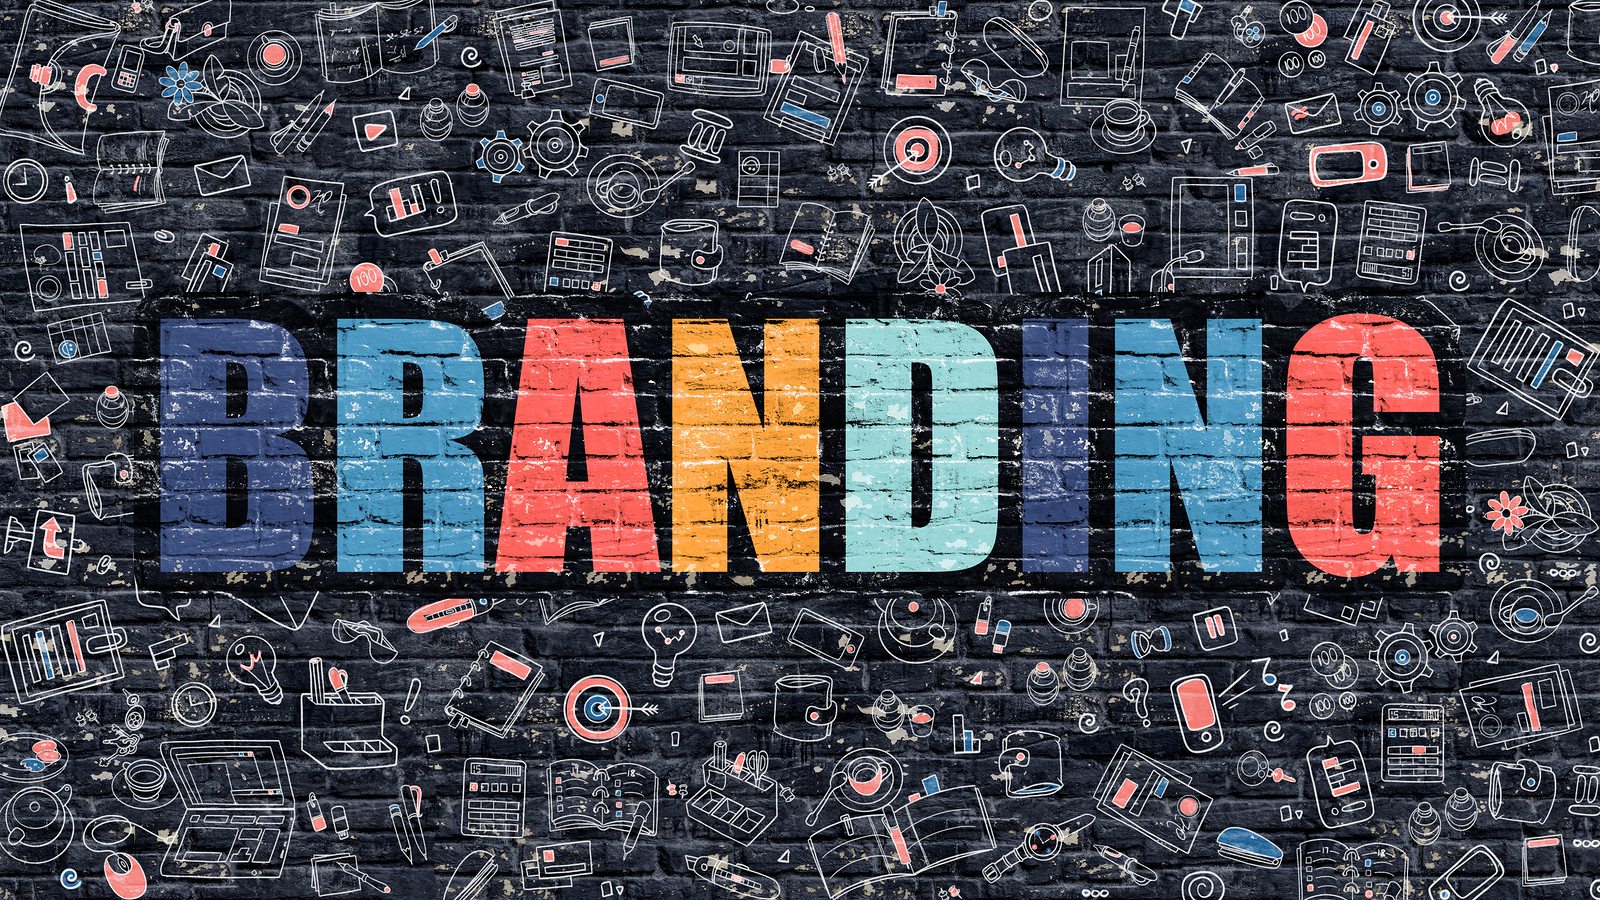 Create a basic branding guide to help consistently promote your small business